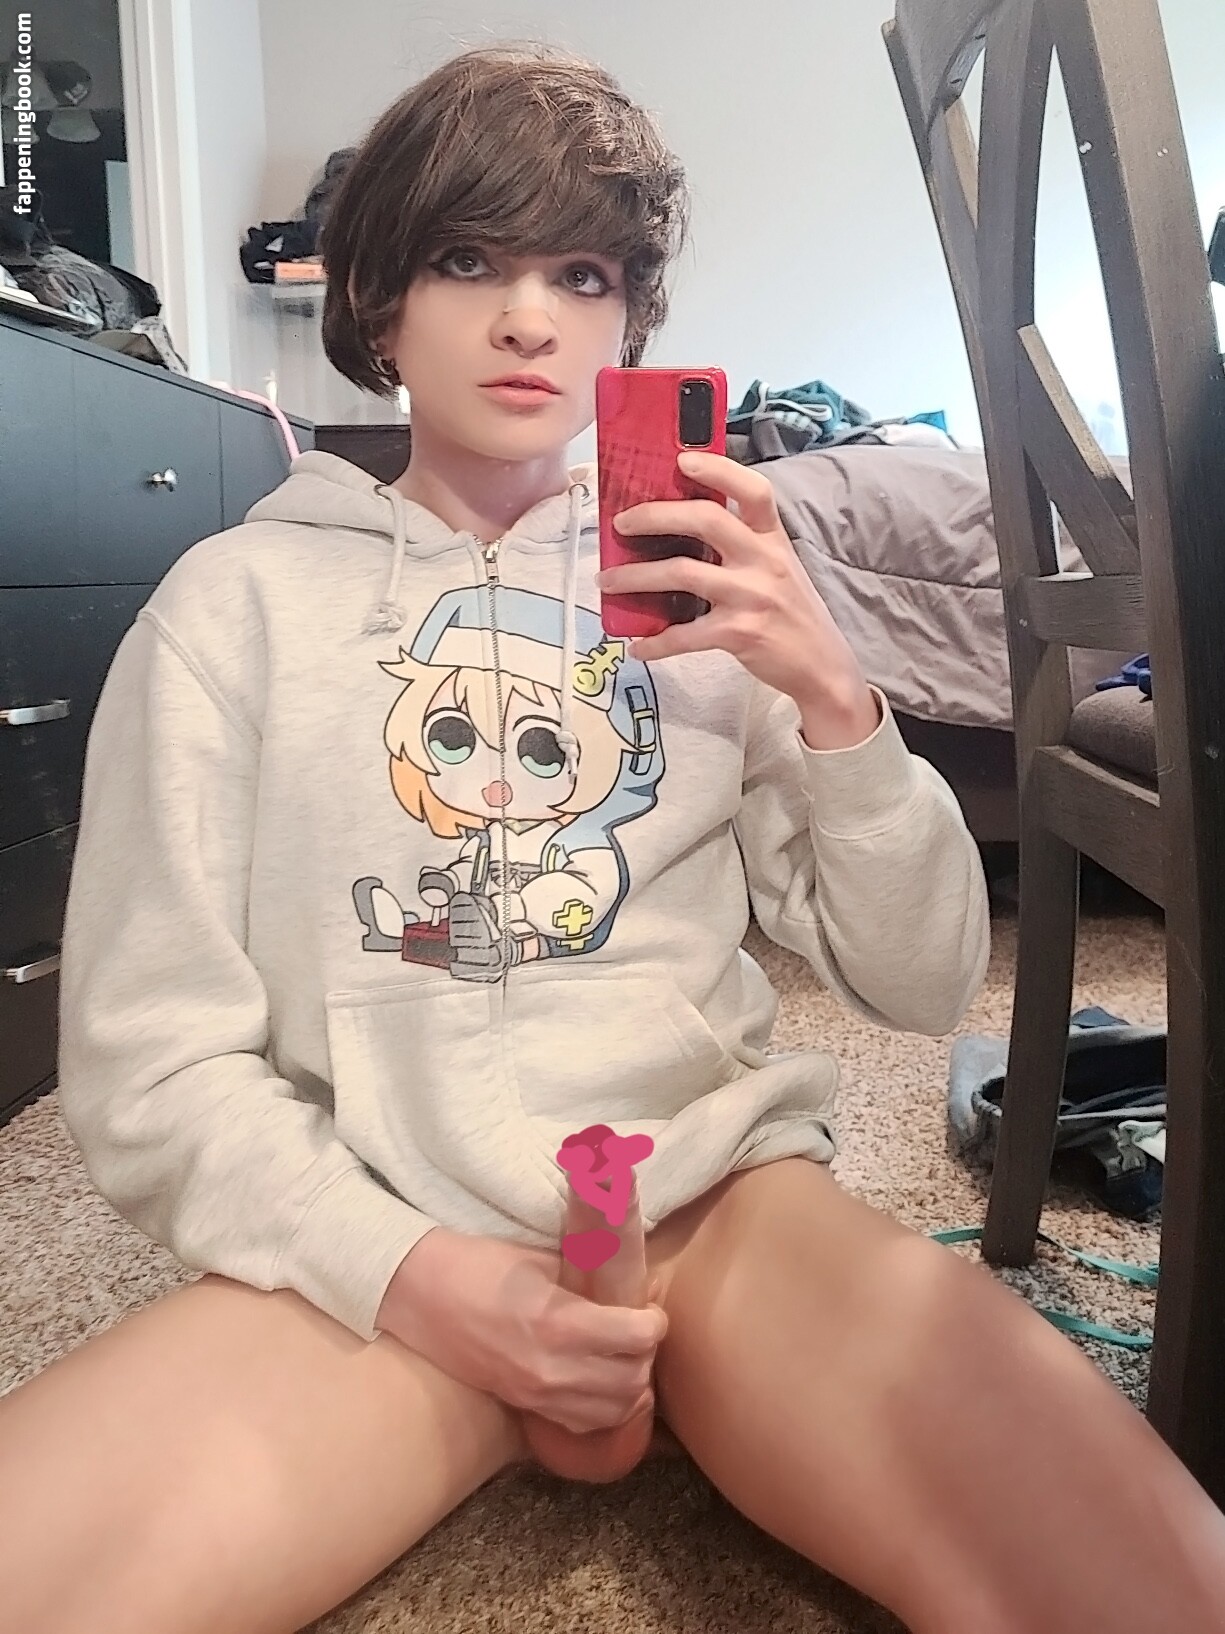 trappychan_ Nude